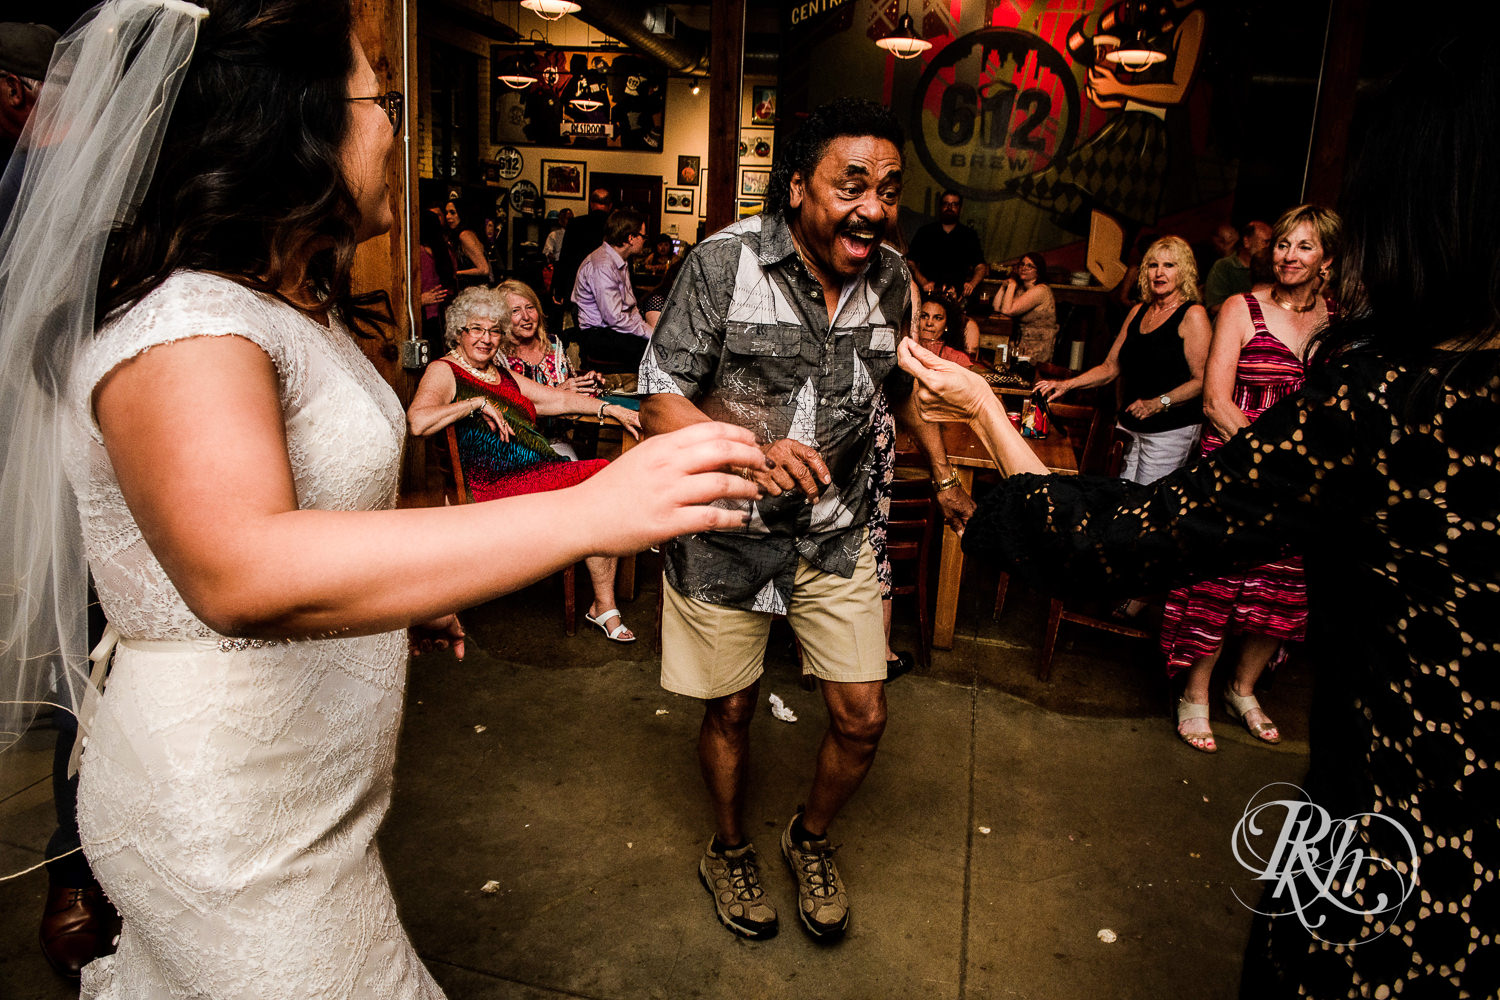 Guests dance during brewery wedding reception at 612 Brew in Minneapolis, Minnesota.